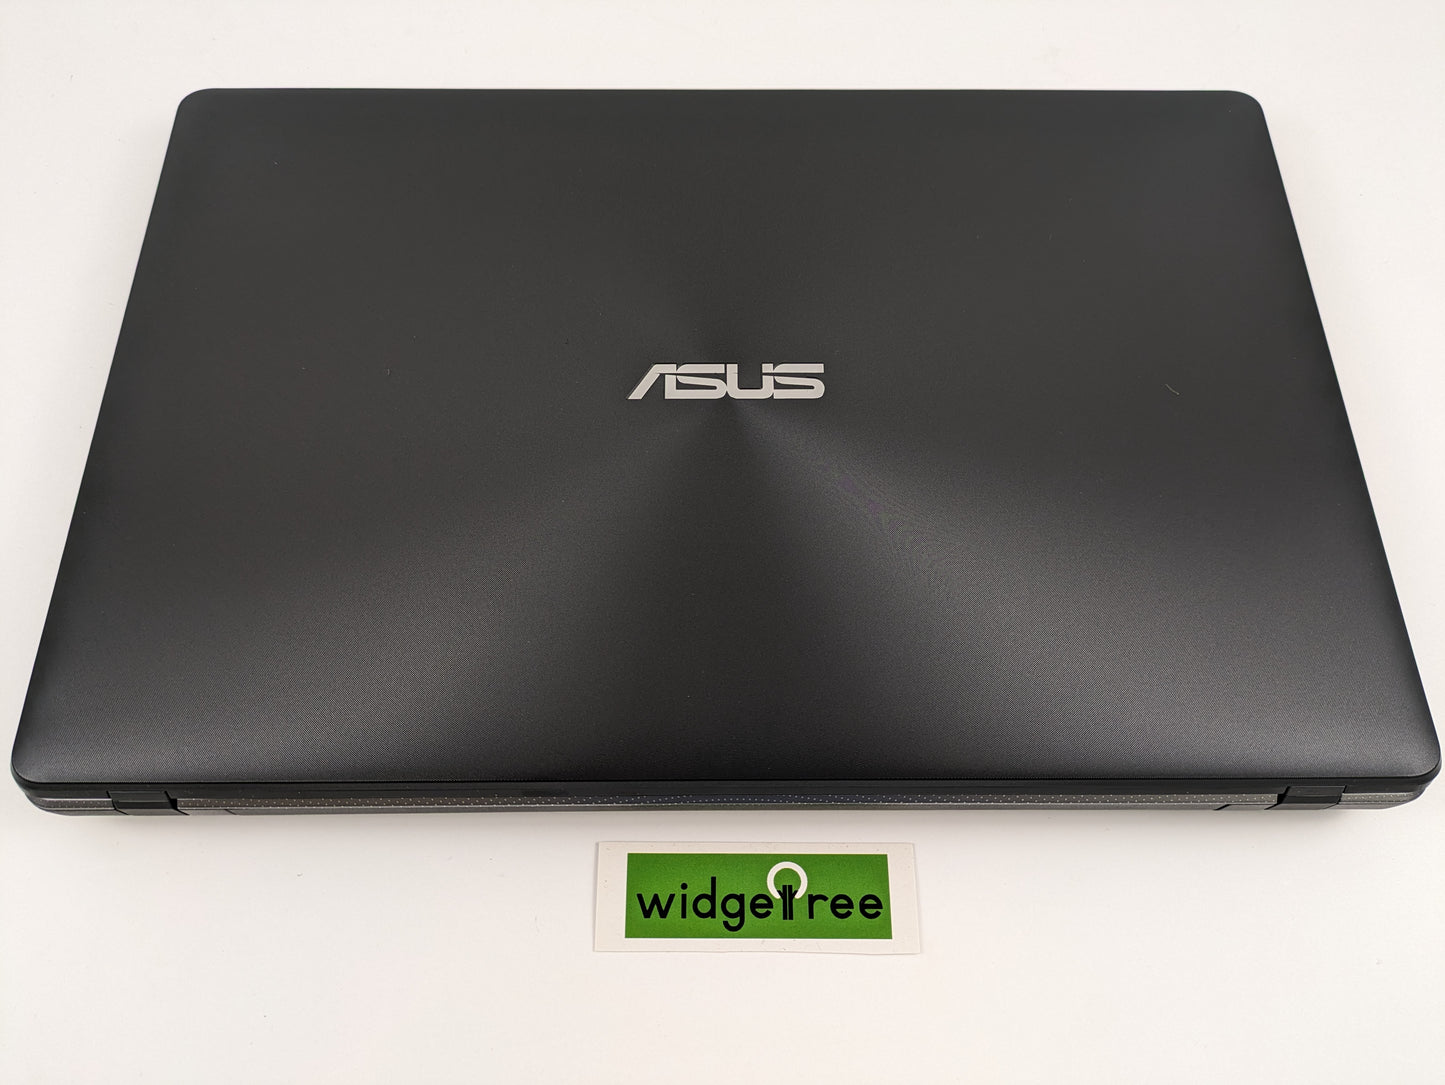 ASUS X550C 15.6" Core i3 3rd 4GB 500GB HDD Touchscreen Laptop - K550CA-DH31T Used